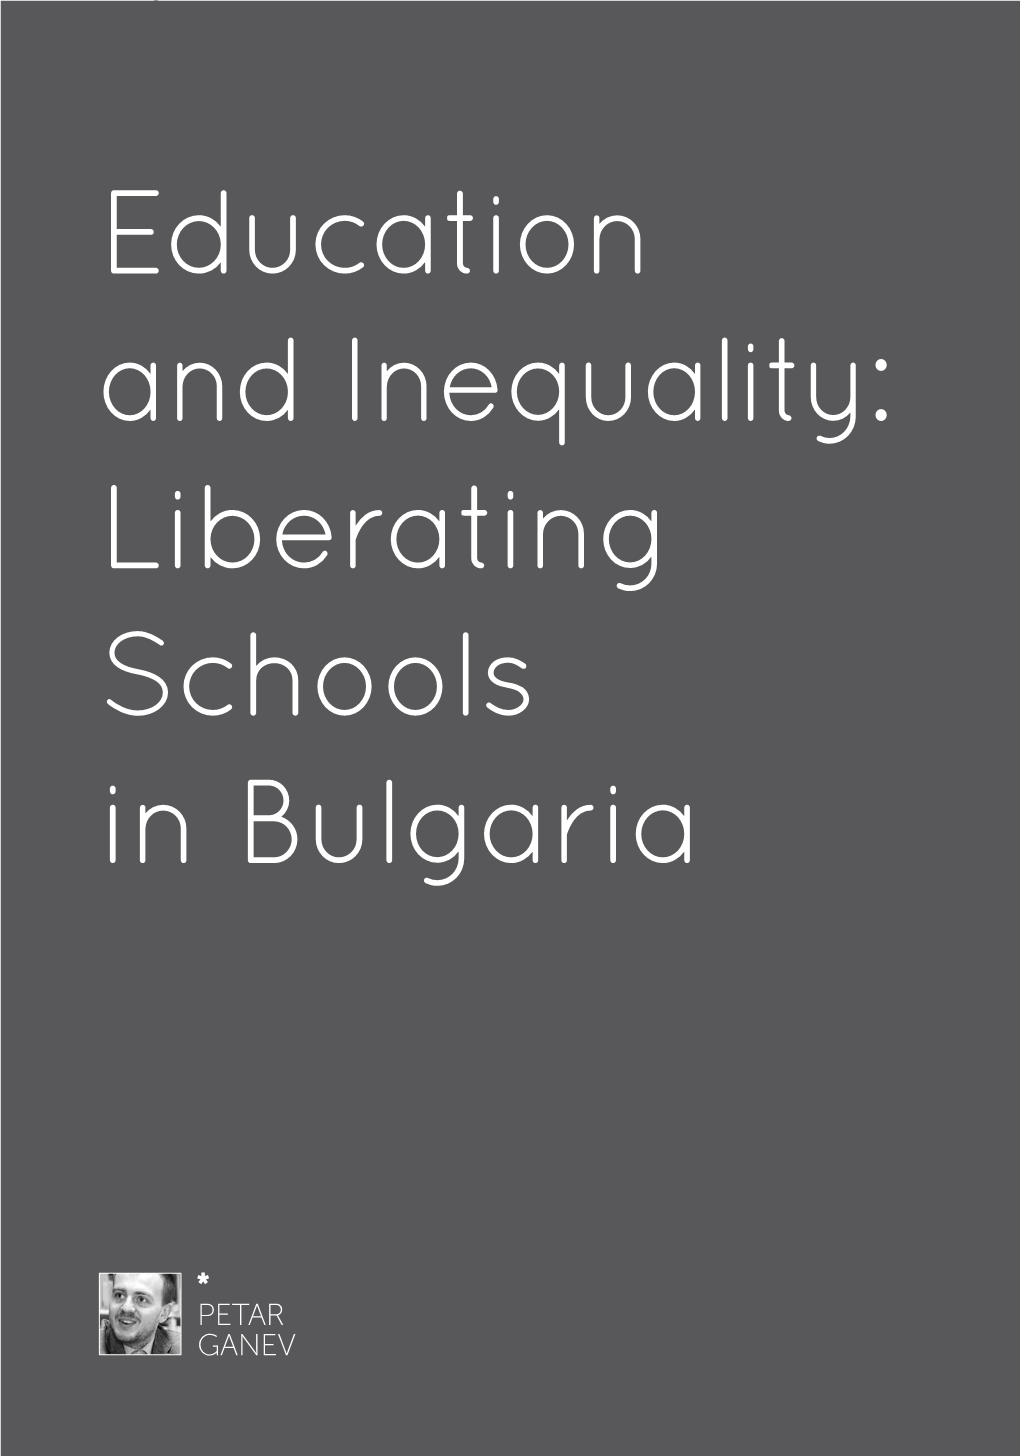 Education and Inequality: Liberating Schools in Bulgaria